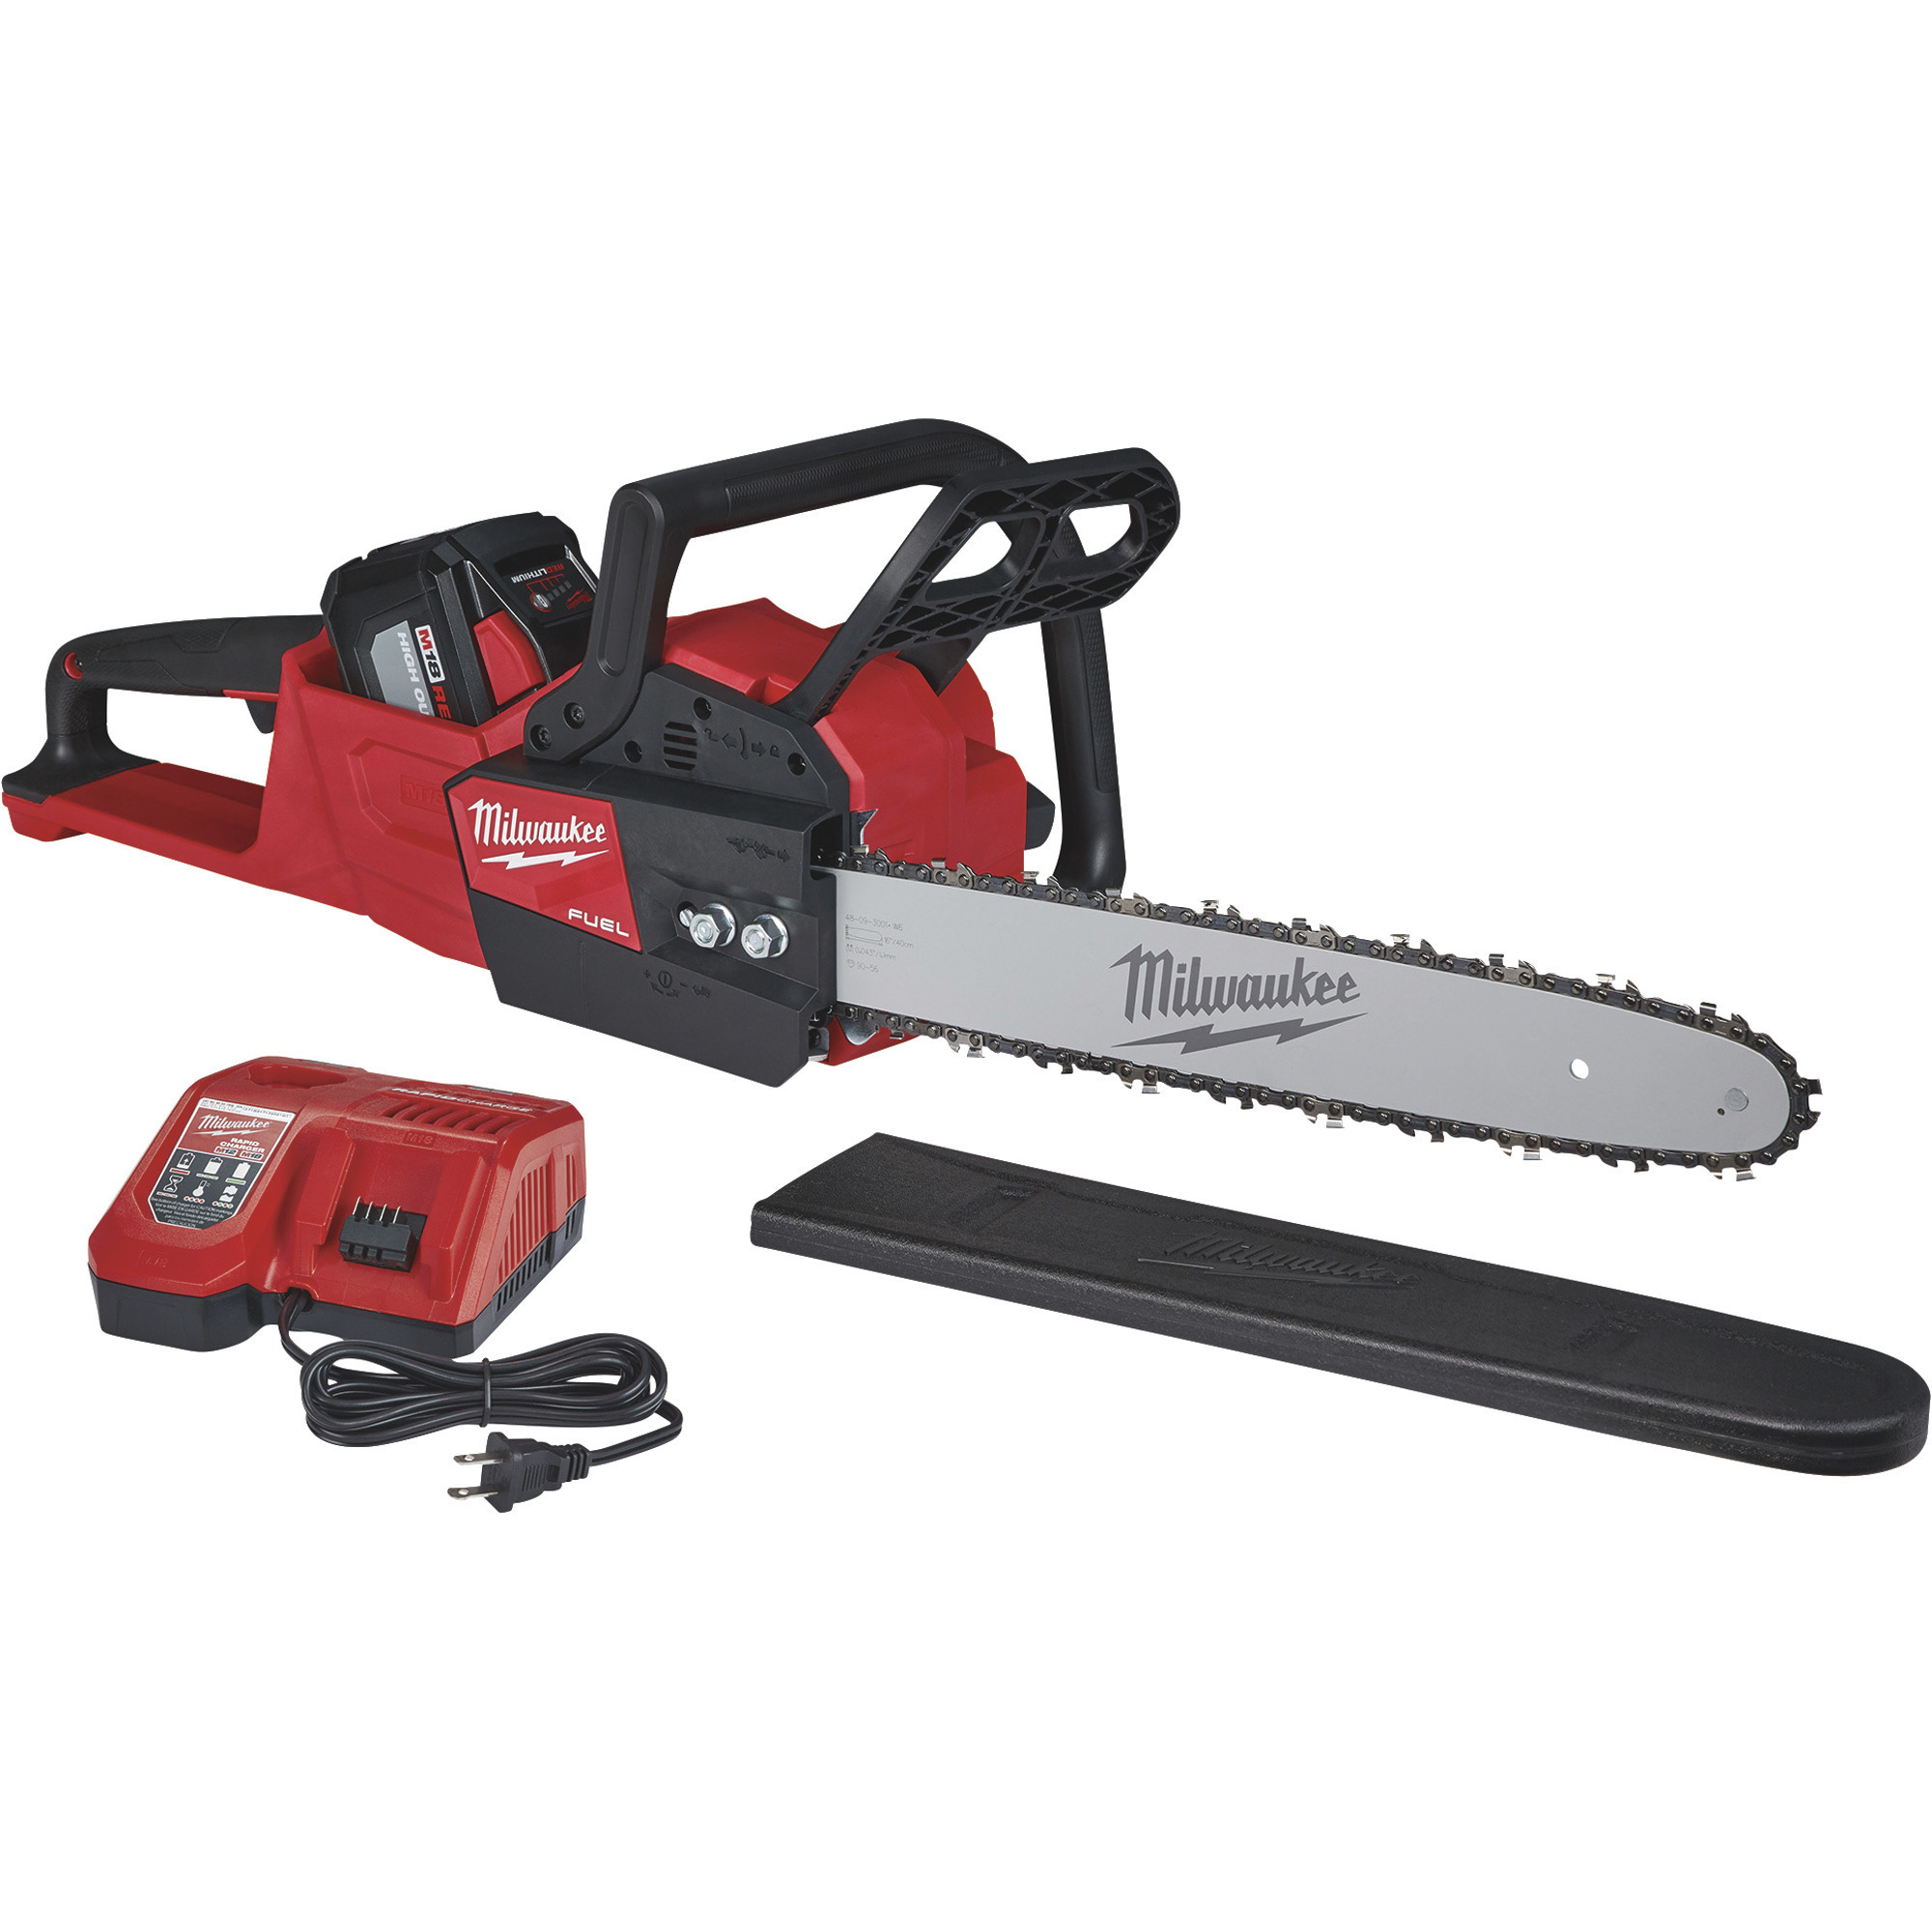 Milwaukee M18 18V Fuel Lithium-Ion Cordless Chainsaw, 16Inch Bar, 12.0Ah Battery, Model 2727-21HD